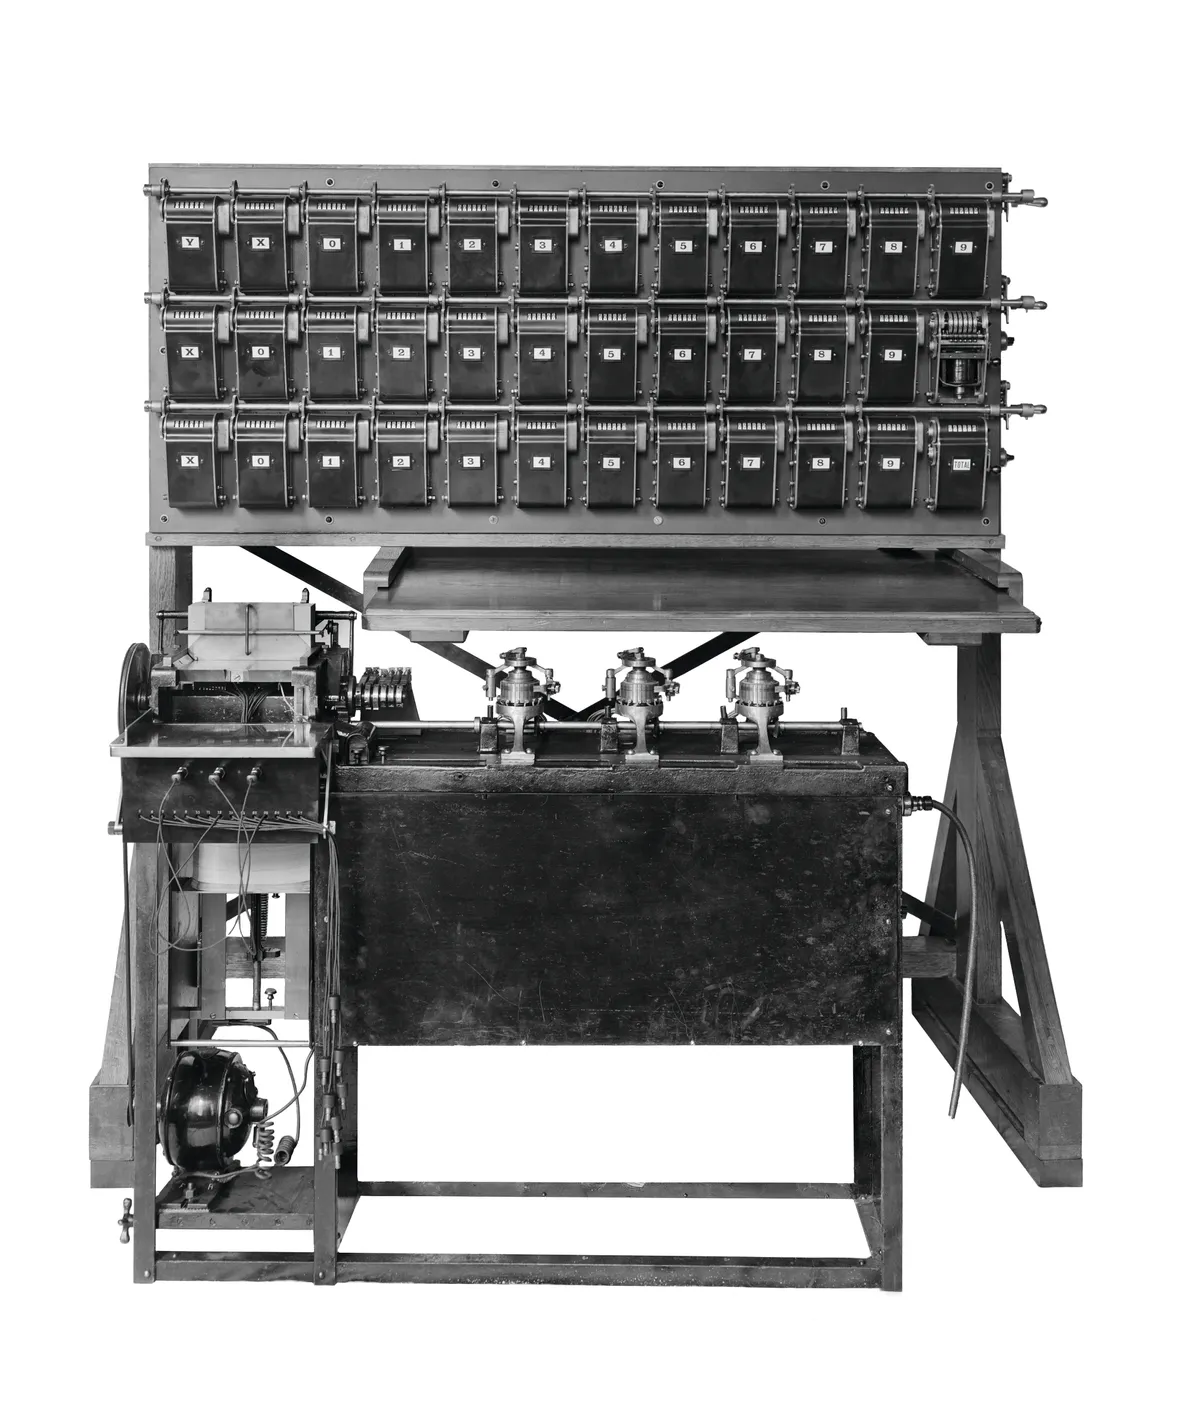 One of the calculating machines used in the 1911 census